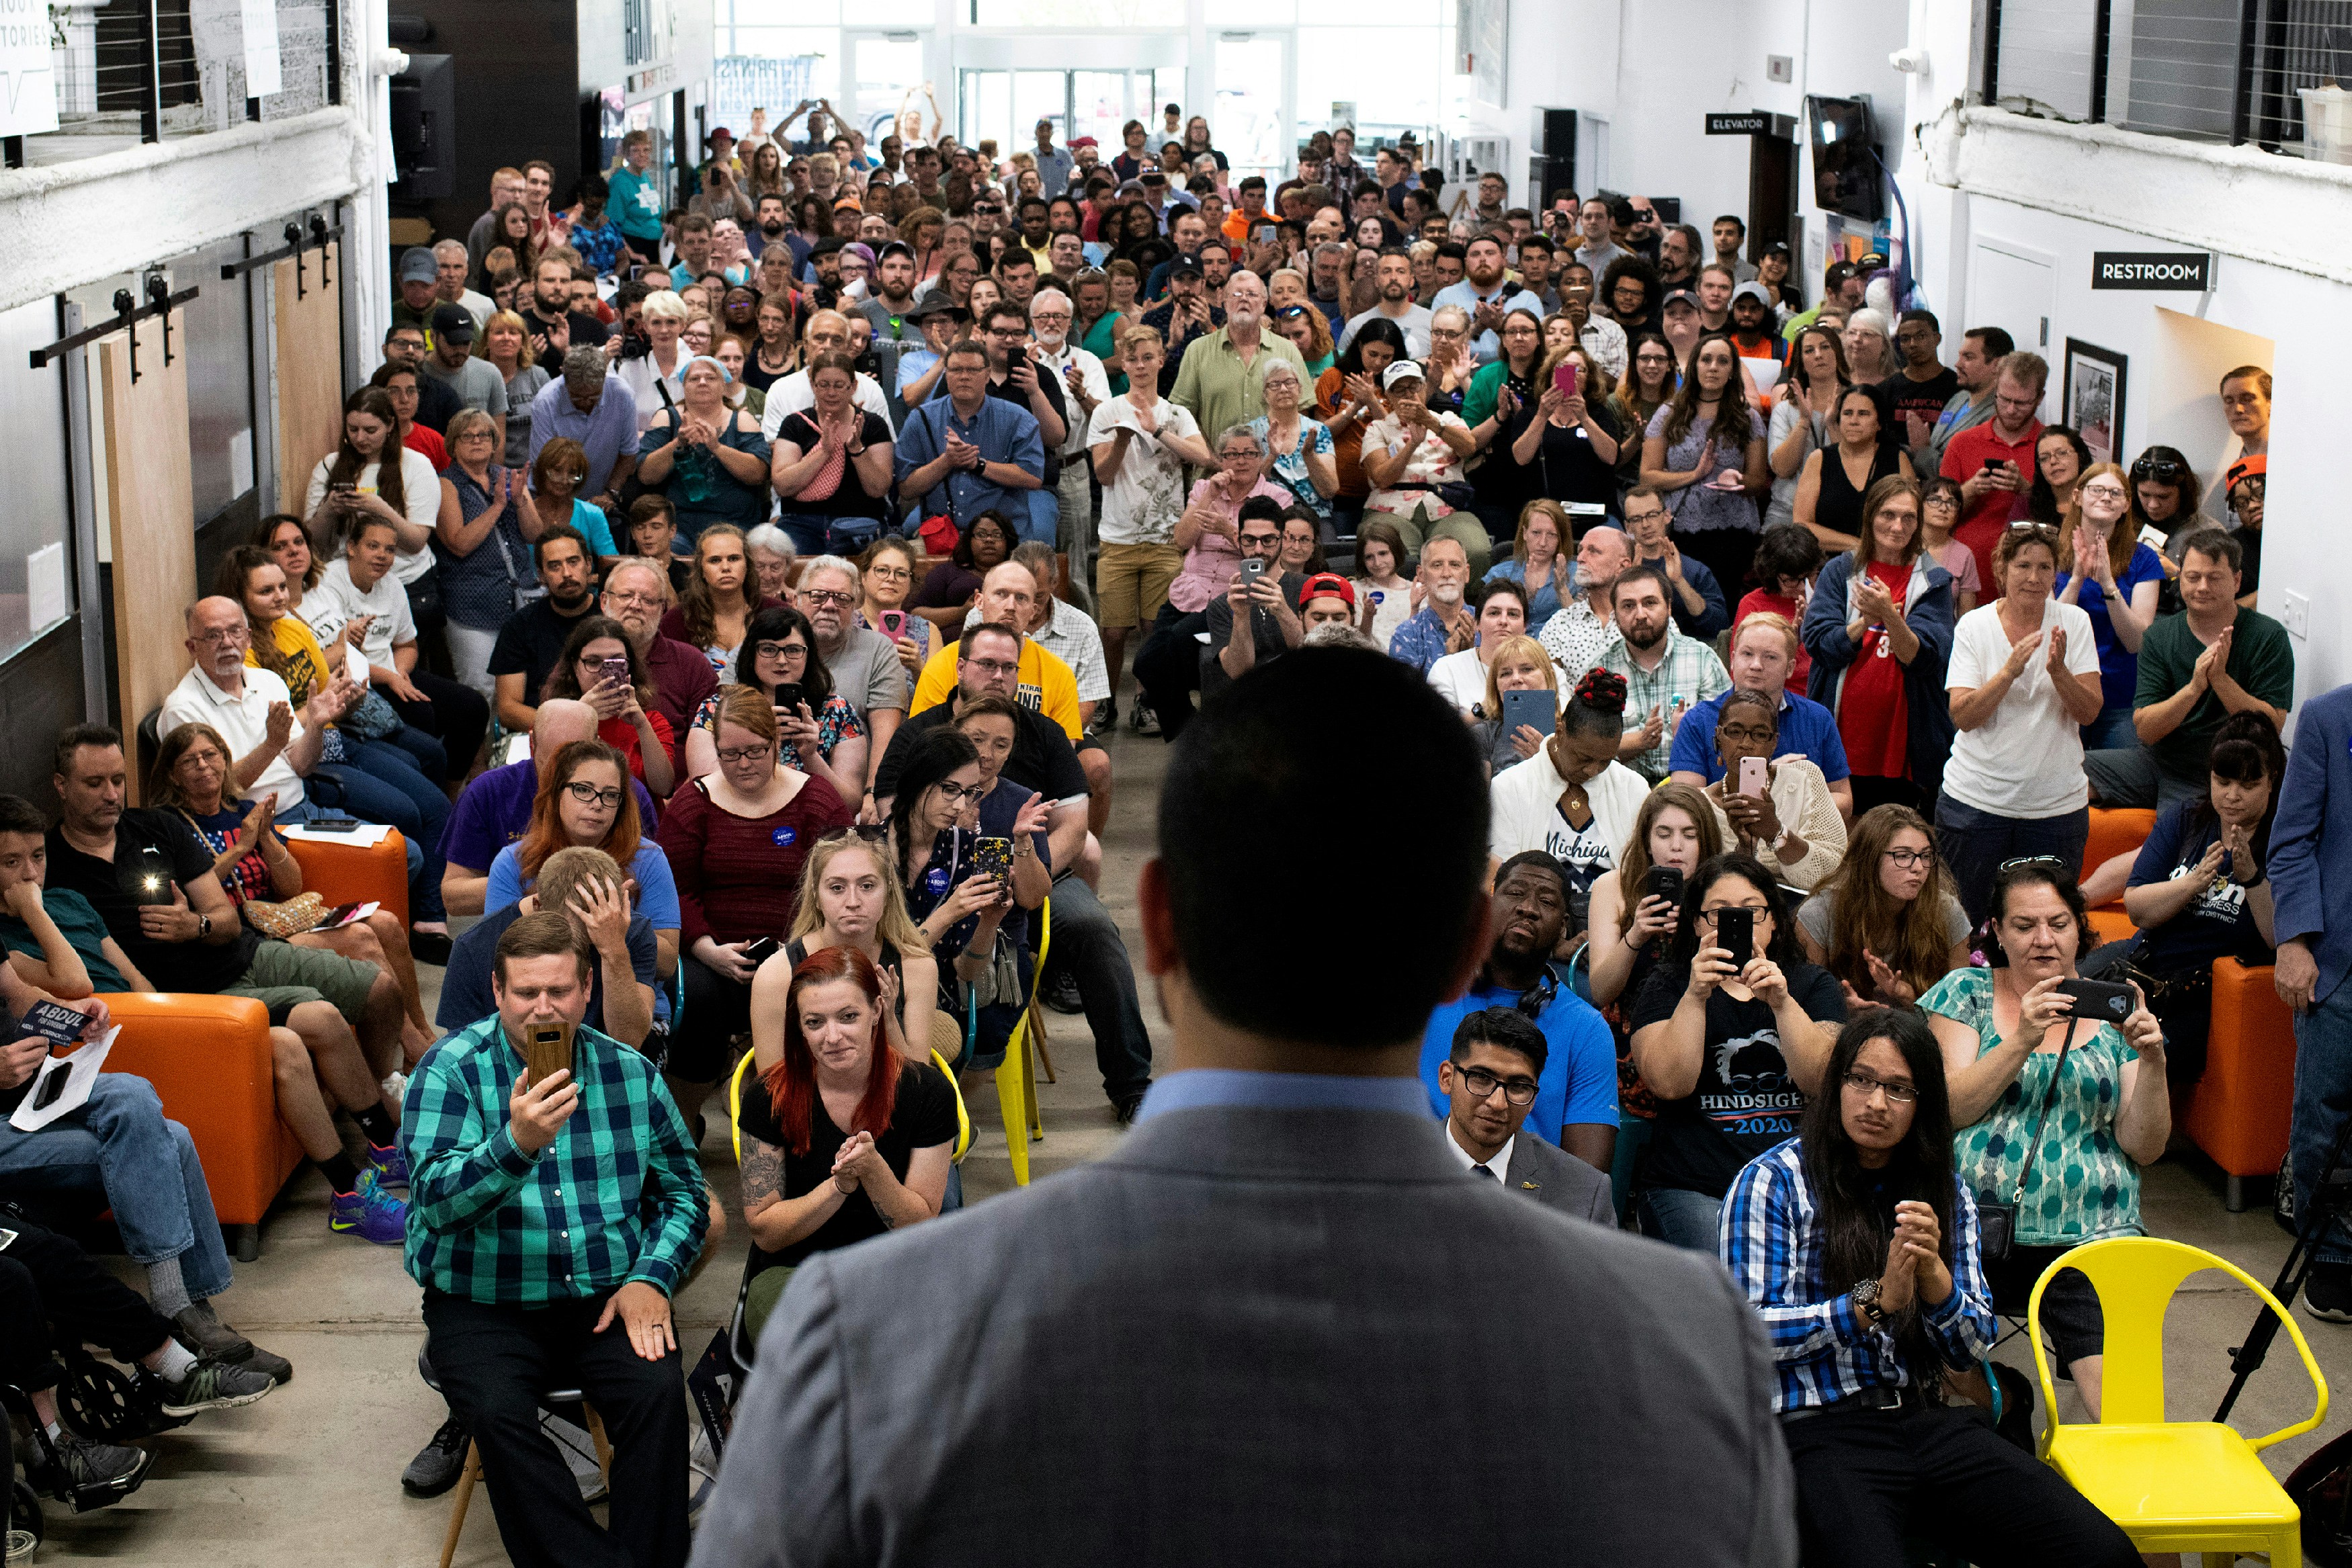 Michigan Democratic Gubernatorial candidate Abdul El-Sayed speaks to a crowd during his campaign rally with Alexandria Ocasio-Cortez at the Ferris Wheel building in Flint, Michigan on Saturday, July 28, 2018. (Rachel Woolf for The Intercept)